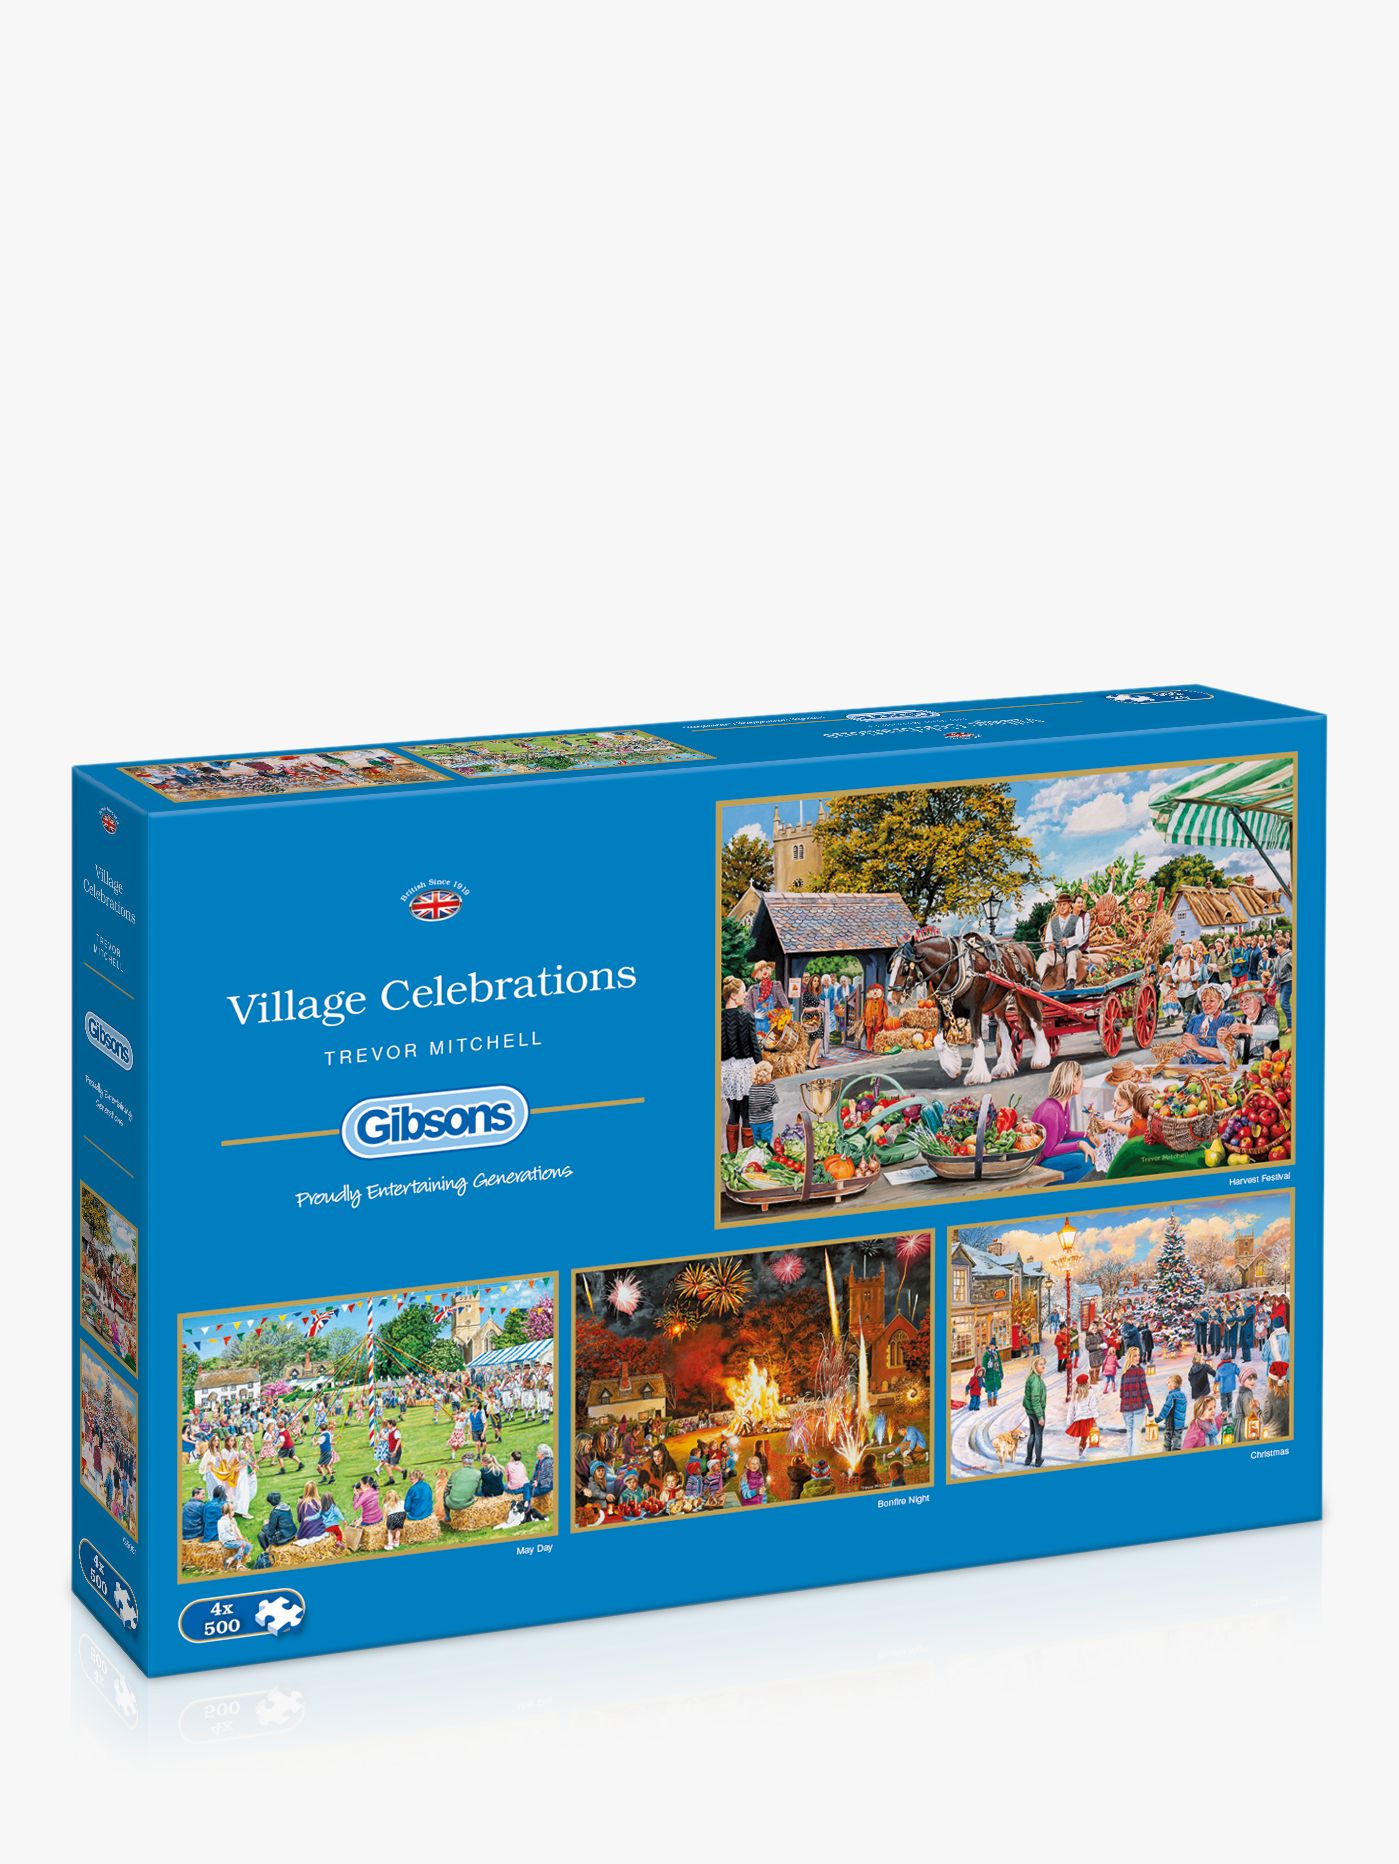 4 x 500 Pieces Gibsons Village Celebrations  Jigsaw Puzzles